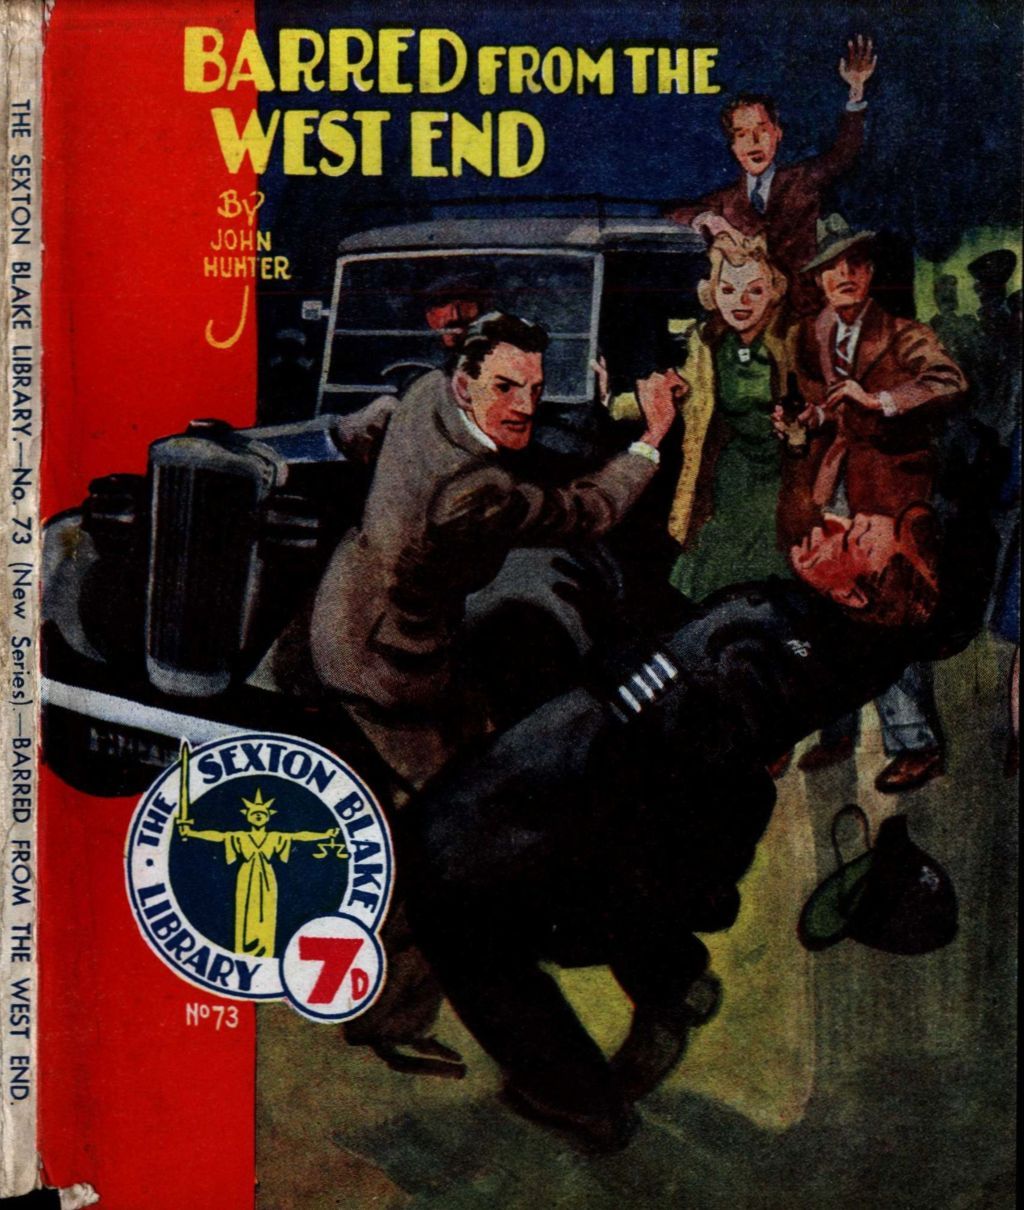 Comic Book Cover For Sexton Blake Library S3 73 - Barred from the West End